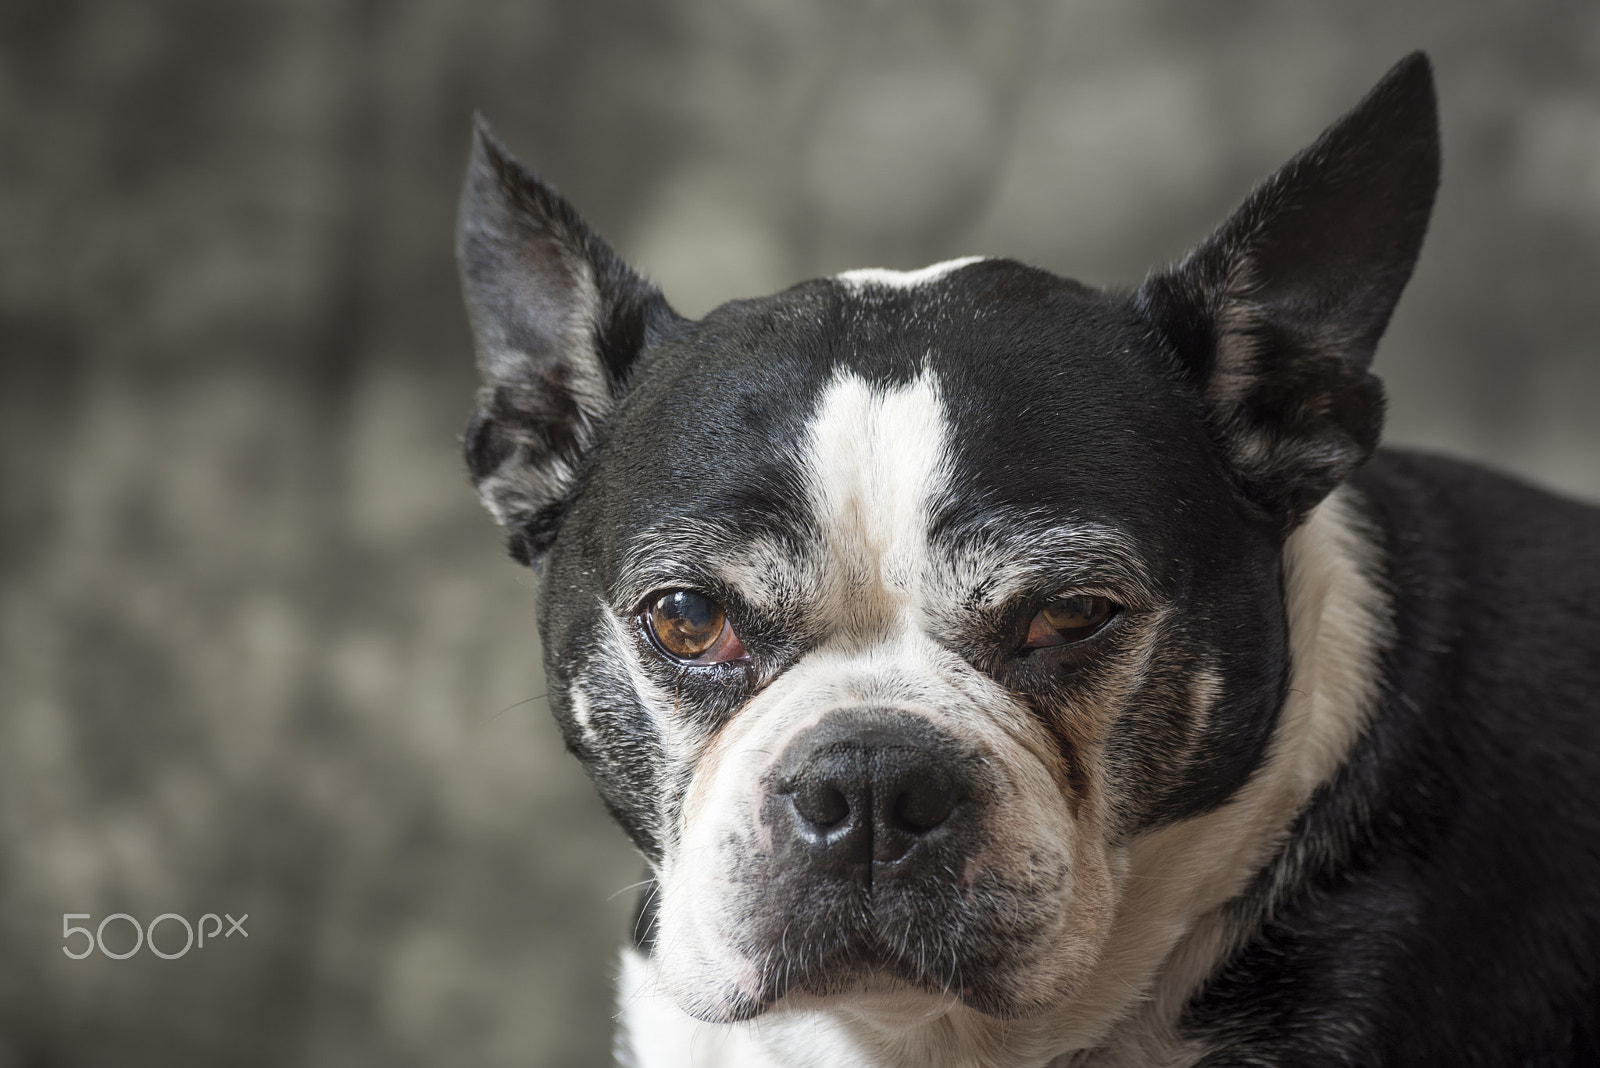 Nikon D810 + Tamron SP 70-300mm F4-5.6 Di VC USD sample photo. Old but cute boston terrier dog in the studio photography